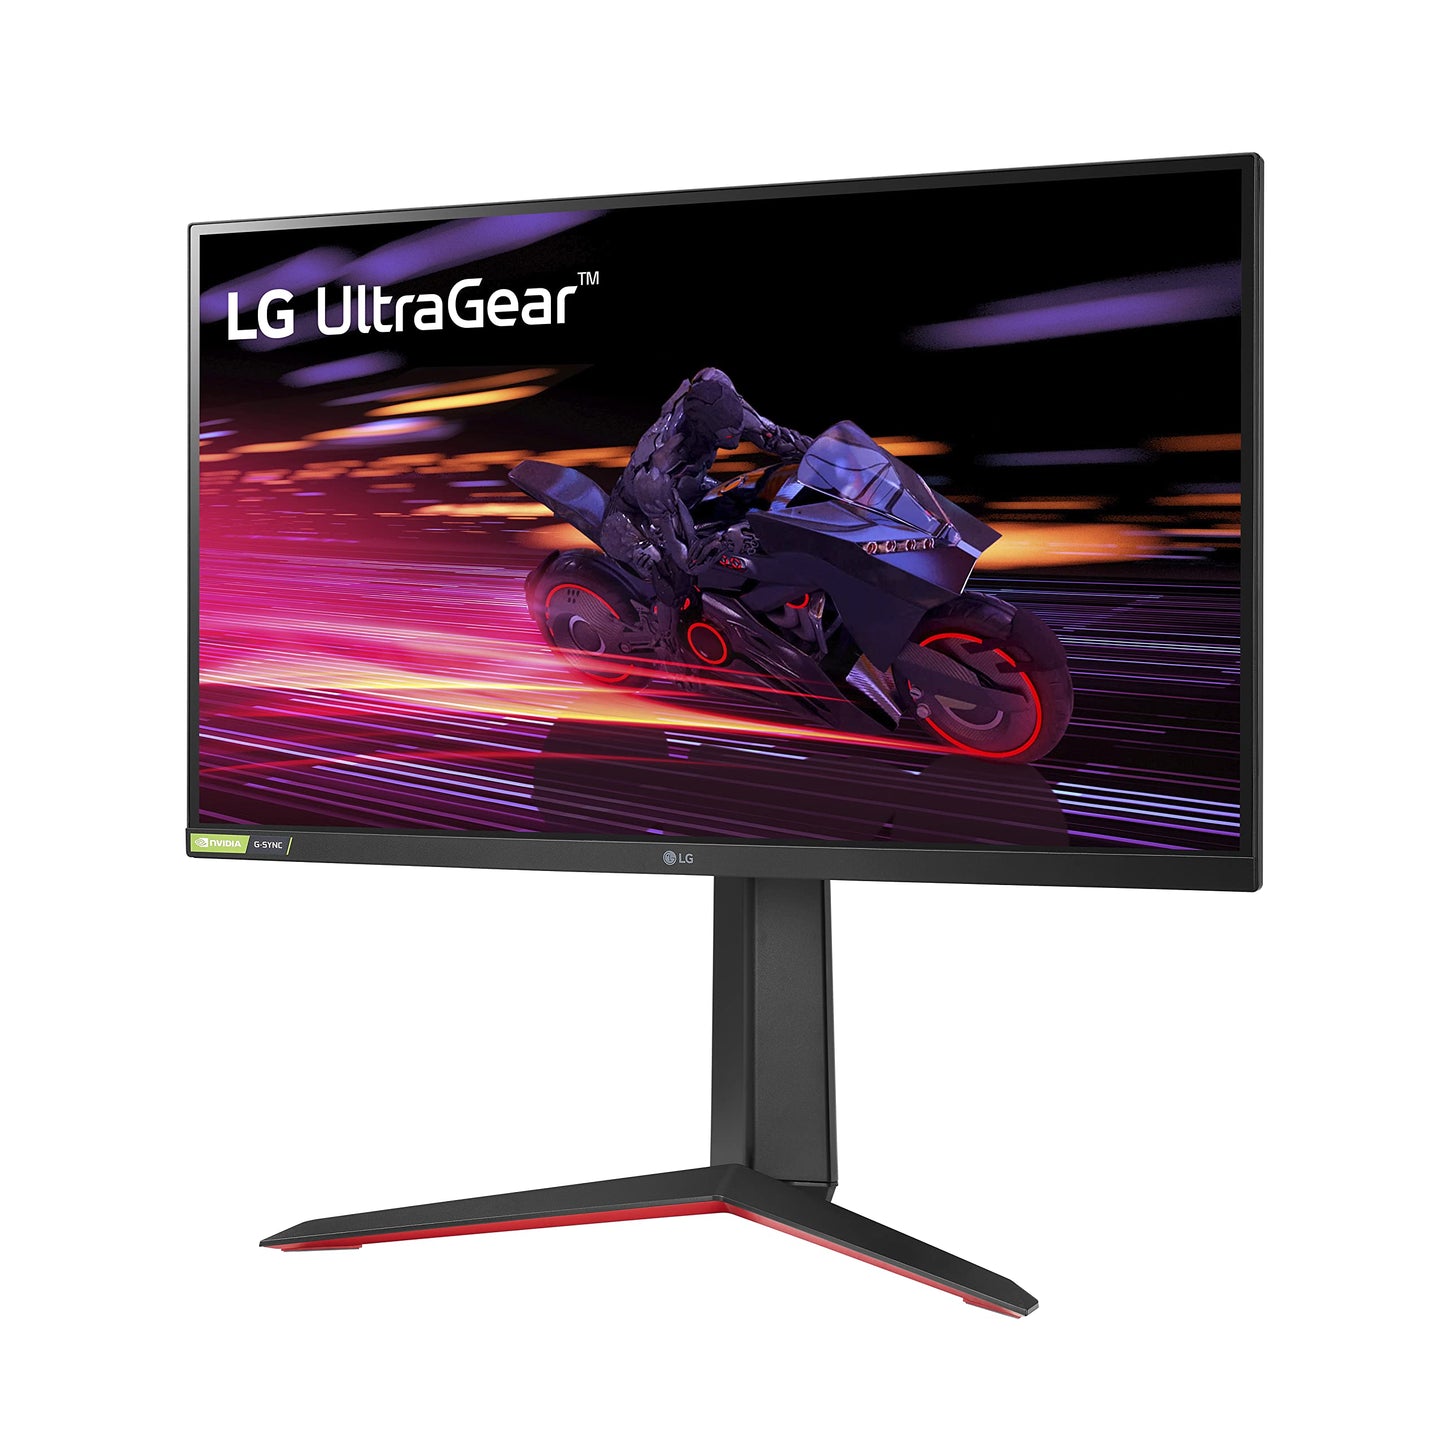 LG 27GP750-B 27” Ultragear FHD (1920 x 1080) IPS Gaming Monitor w/ 1ms Response Time & 240Hz Refresh Rate, NVIDIA G-SYNC Compatible with AMD FreeSync Premium, Thin Bezel, Tilt/Height/Pivot Adjustable